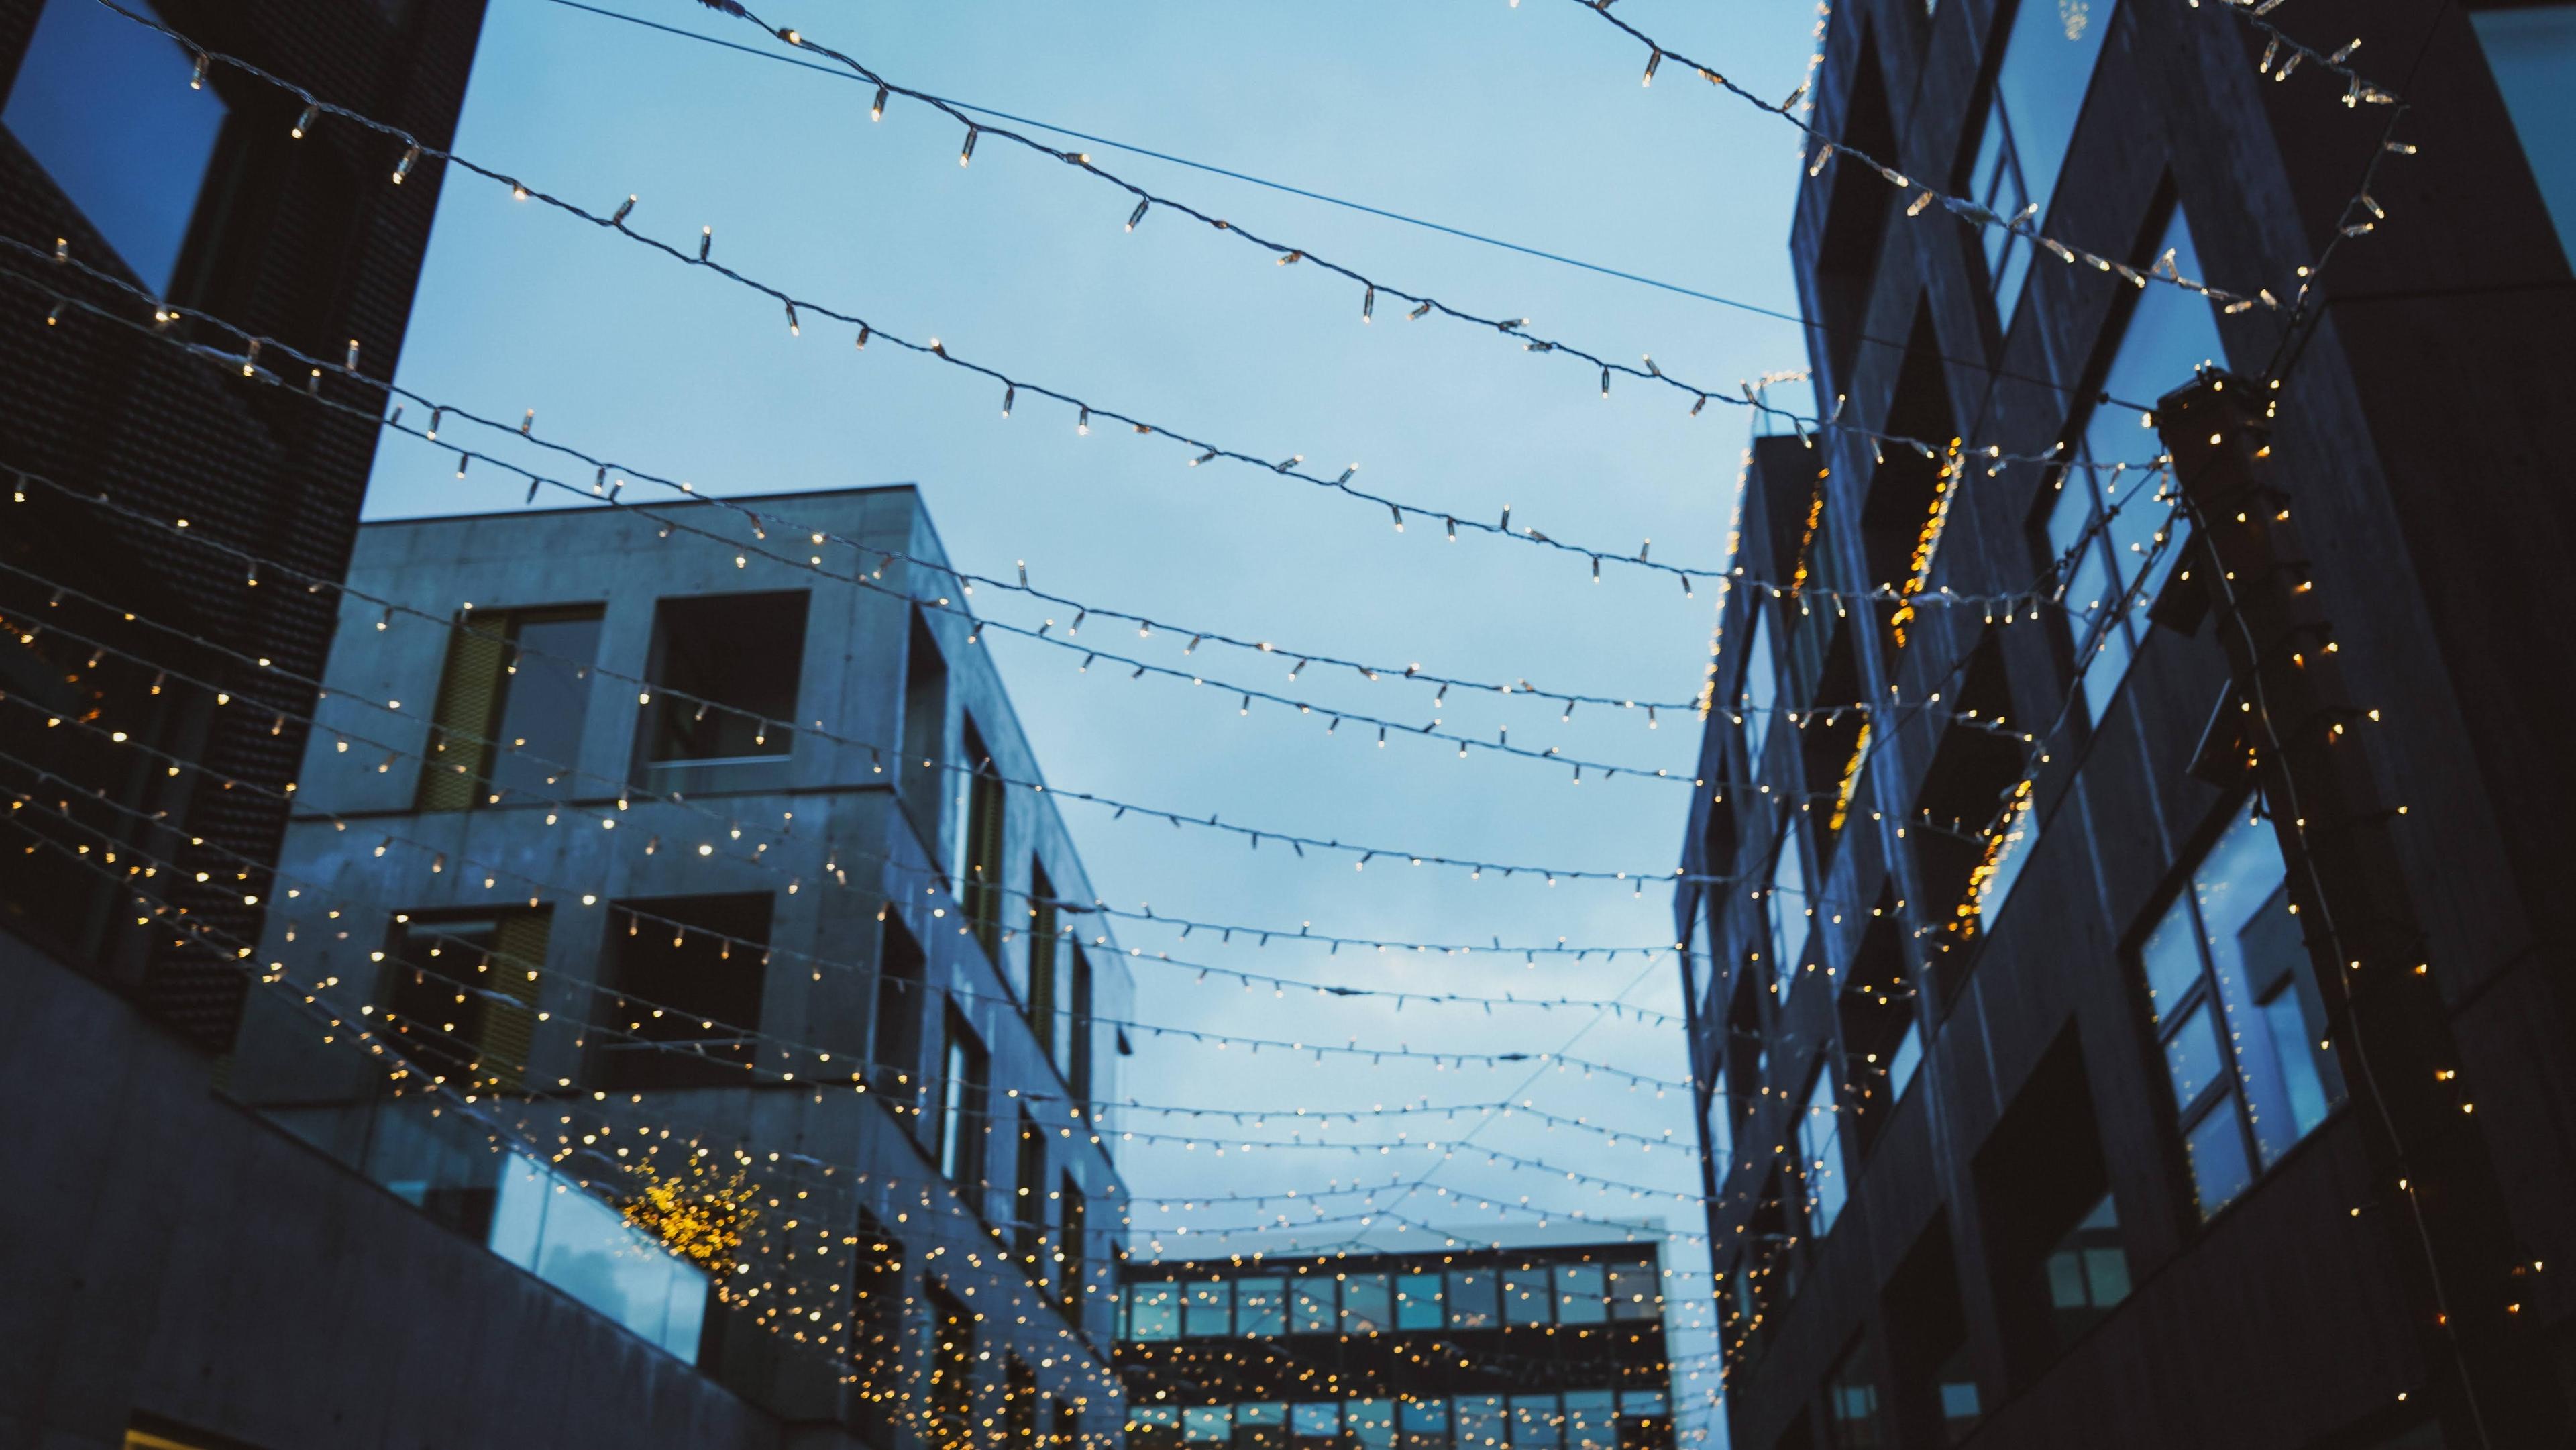 Fairy lights strung between modern buildings, creating a festive atmosphere in an urban setting at dusk.